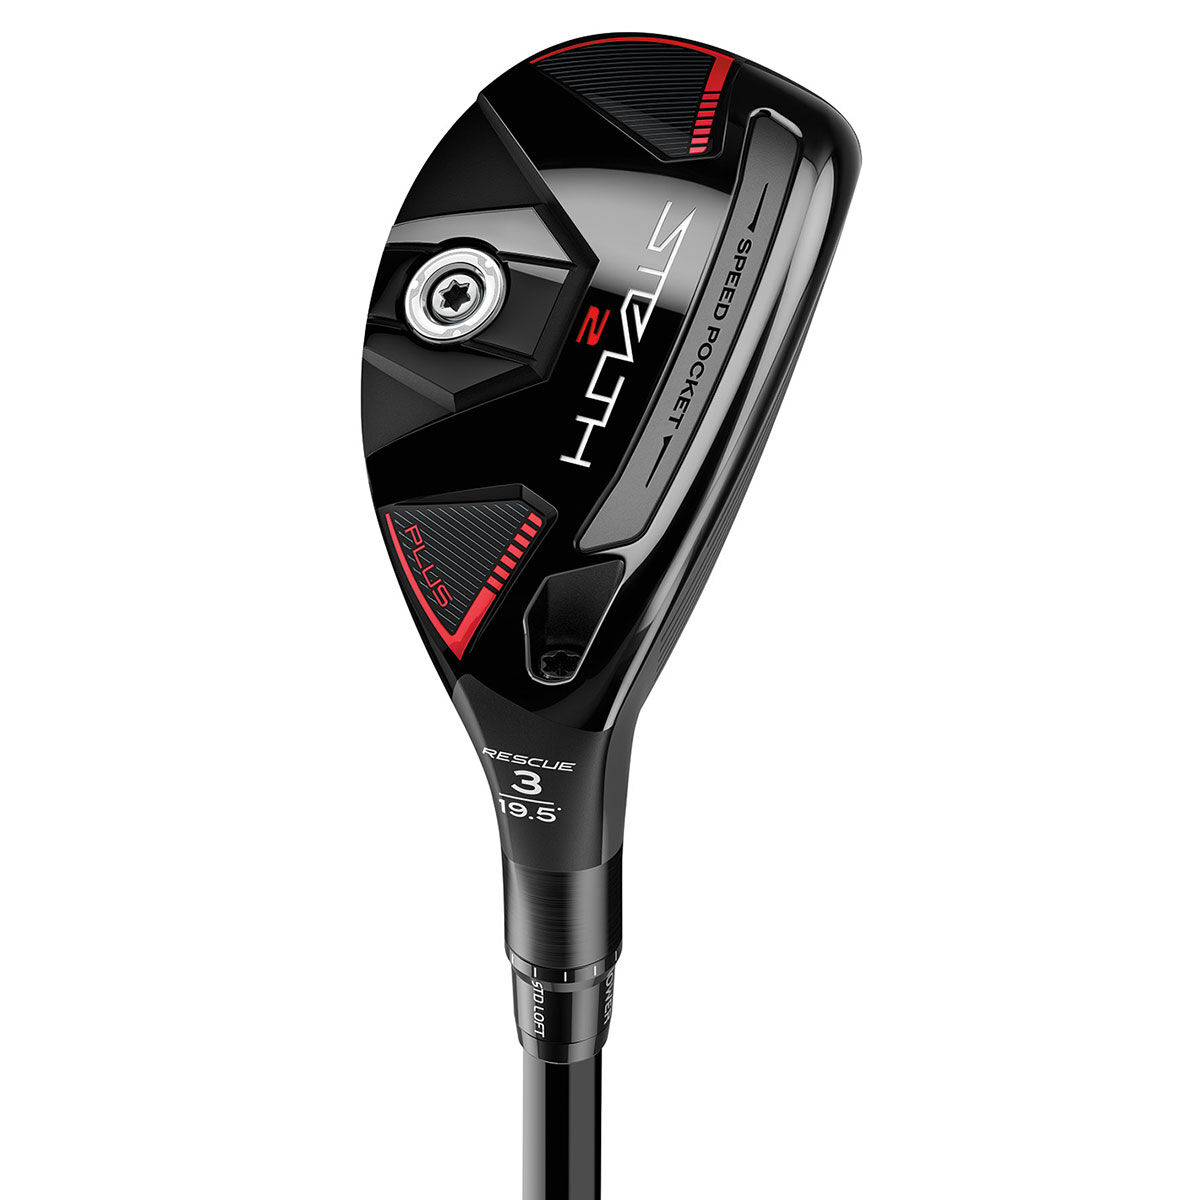 TaylorMade Mens Black and Red STEALTH 2 Plus Rescue Right Hand Mitsubishi Kai'li Regular Golf Hybrid, Size: 22° | American Golf von TaylorMade